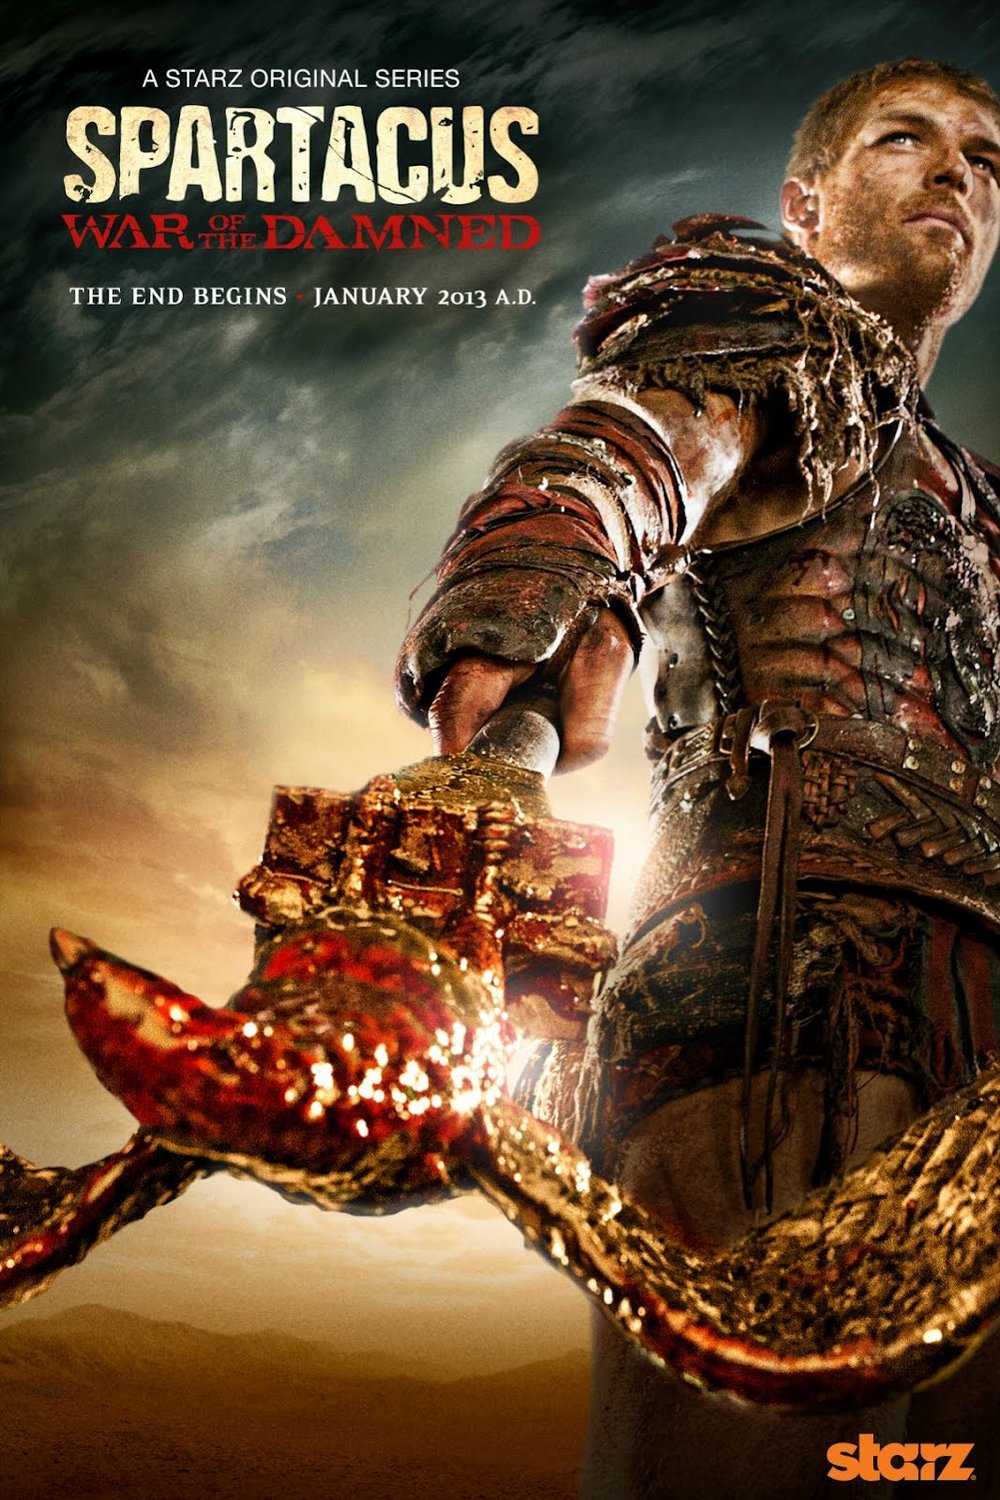 Poster of the movie Spartacus: War of the Damned